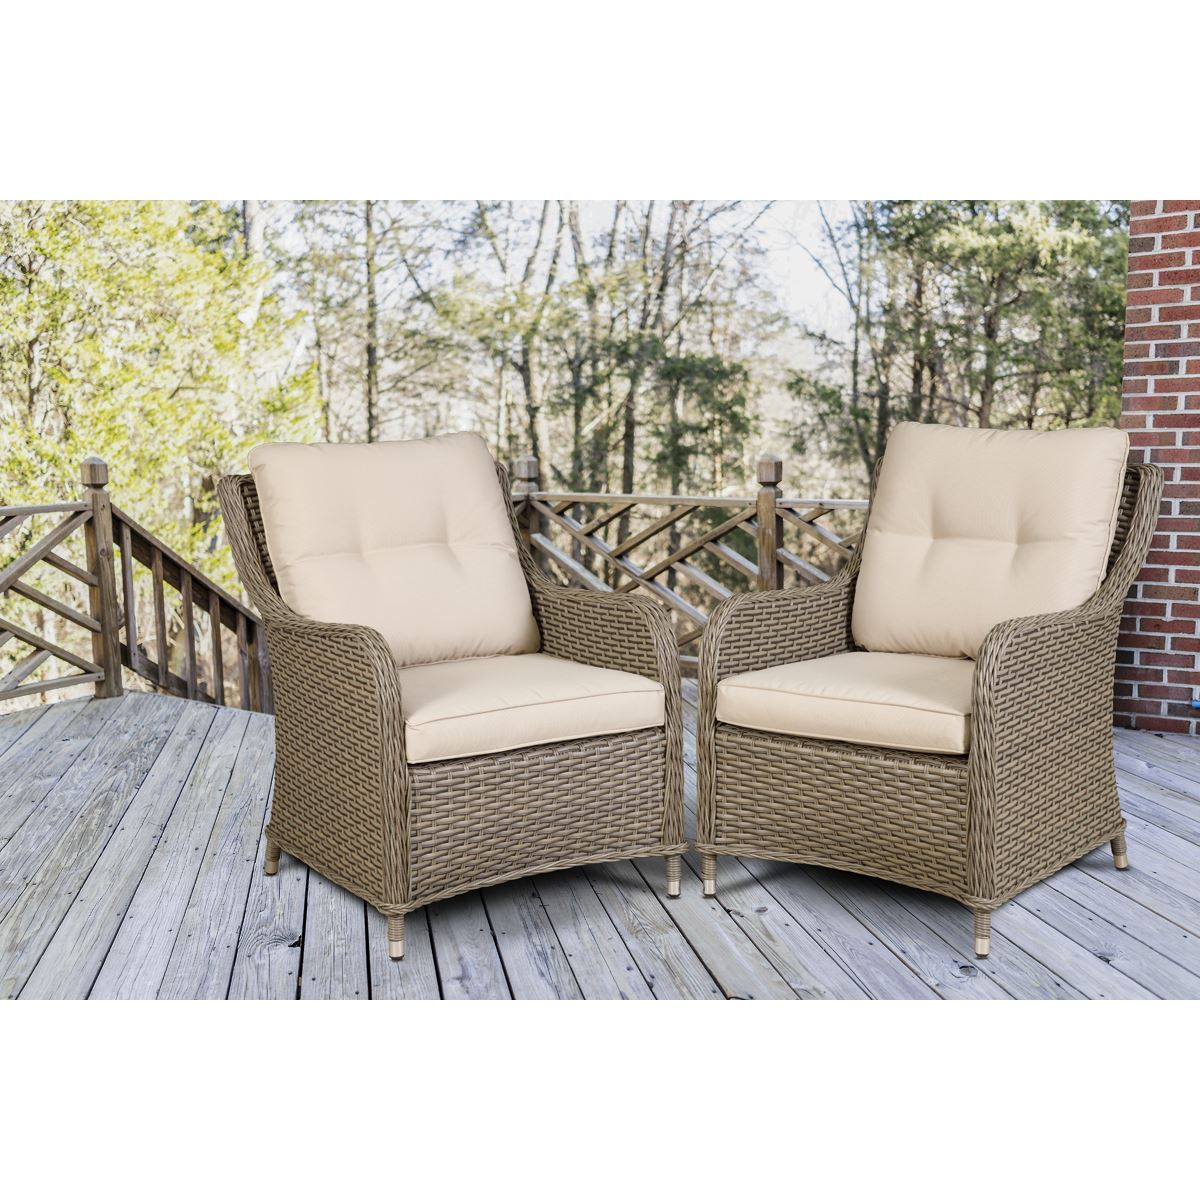 Dellonda Chester Rattan Wicker Outdoor Lounge Chairs with Cushion, Brown